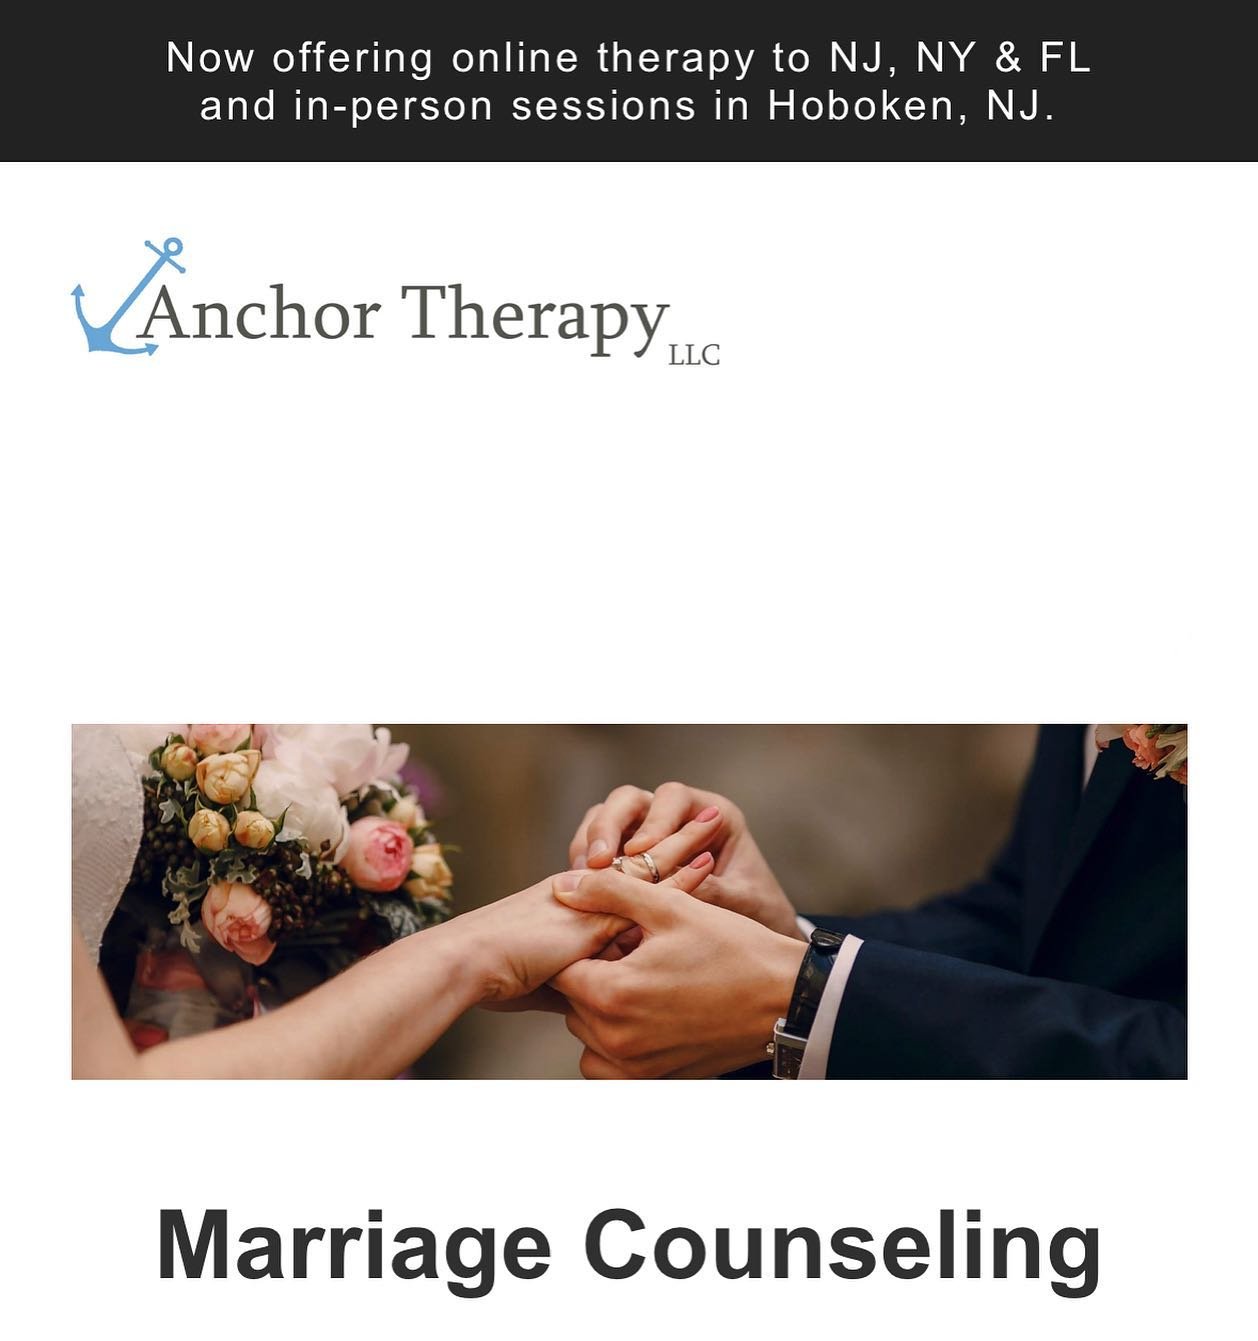 Did you know we offer marriage counseling at Anchor Therapy? Marriage counseling, also known as couples therapy, typically involves several key components aimed at addressing relationship issues and improving communication and understanding between p